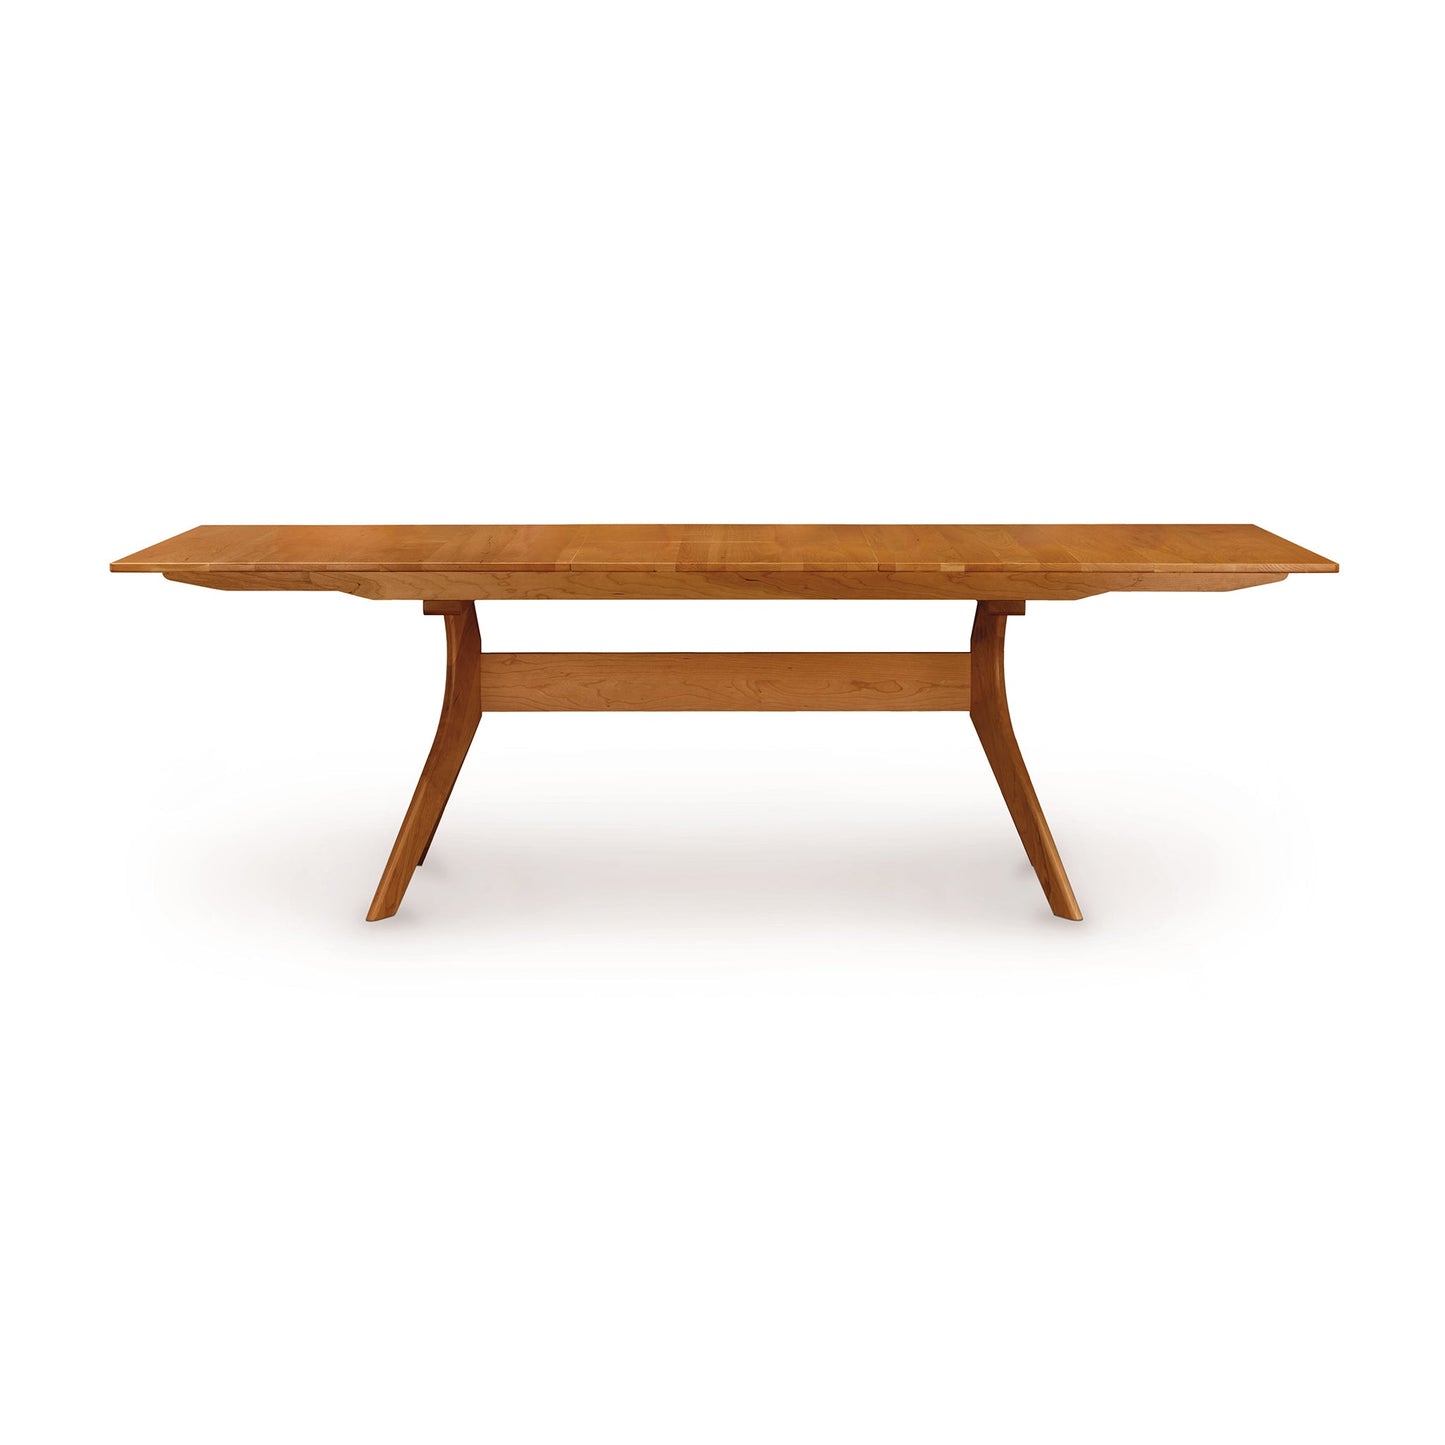 A wooden dining table with a wooden top.